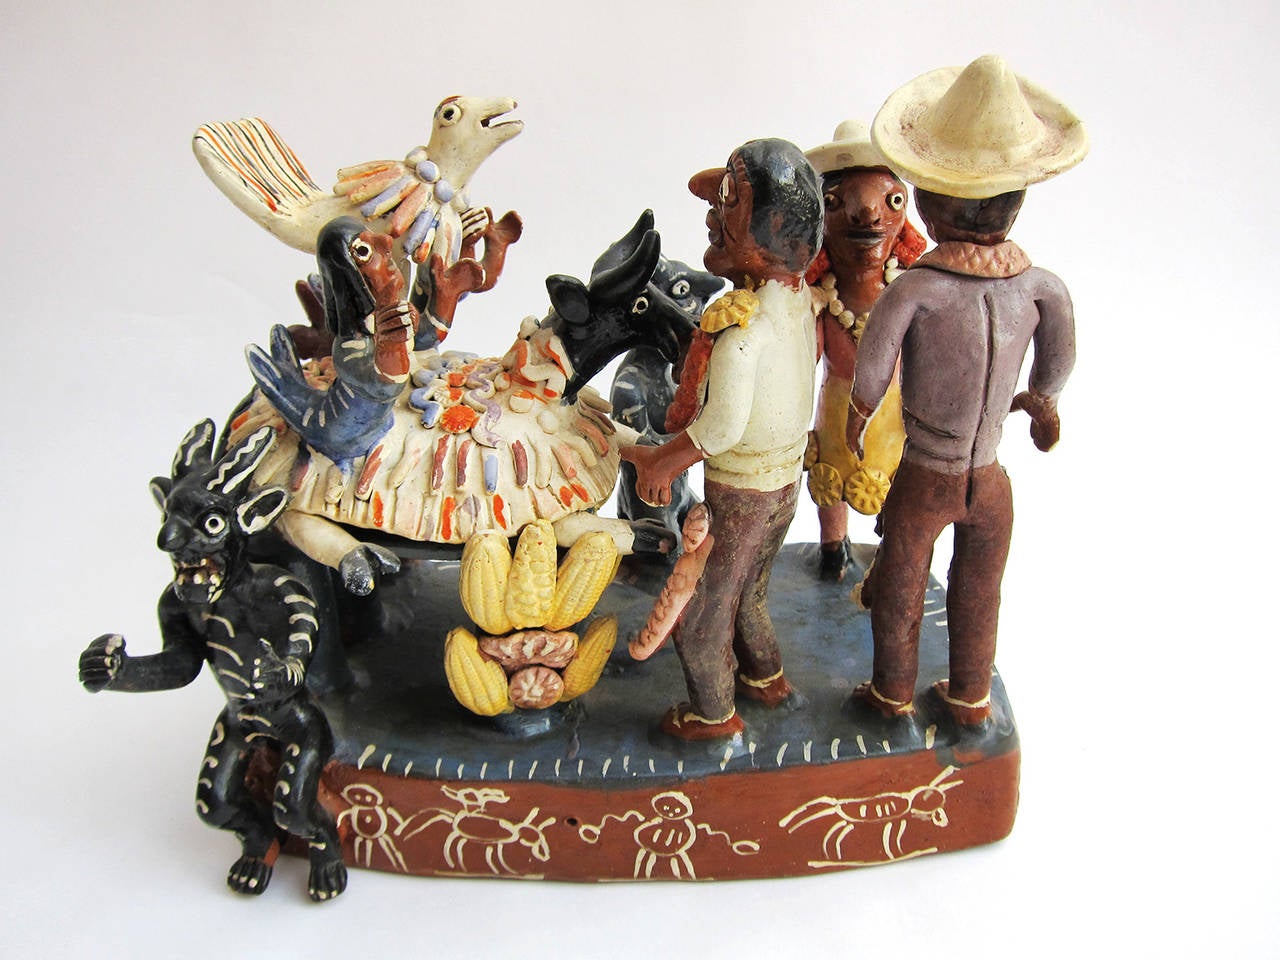 In Ocumicho, Michoacan, potters produce clay sculptures found nowhere else in Mexico. Highly unusual and fantastical, these pieces mix religion, folklore and everyday life into hybrid scenes that are wonderfully absurd and imaginative. 
A young man